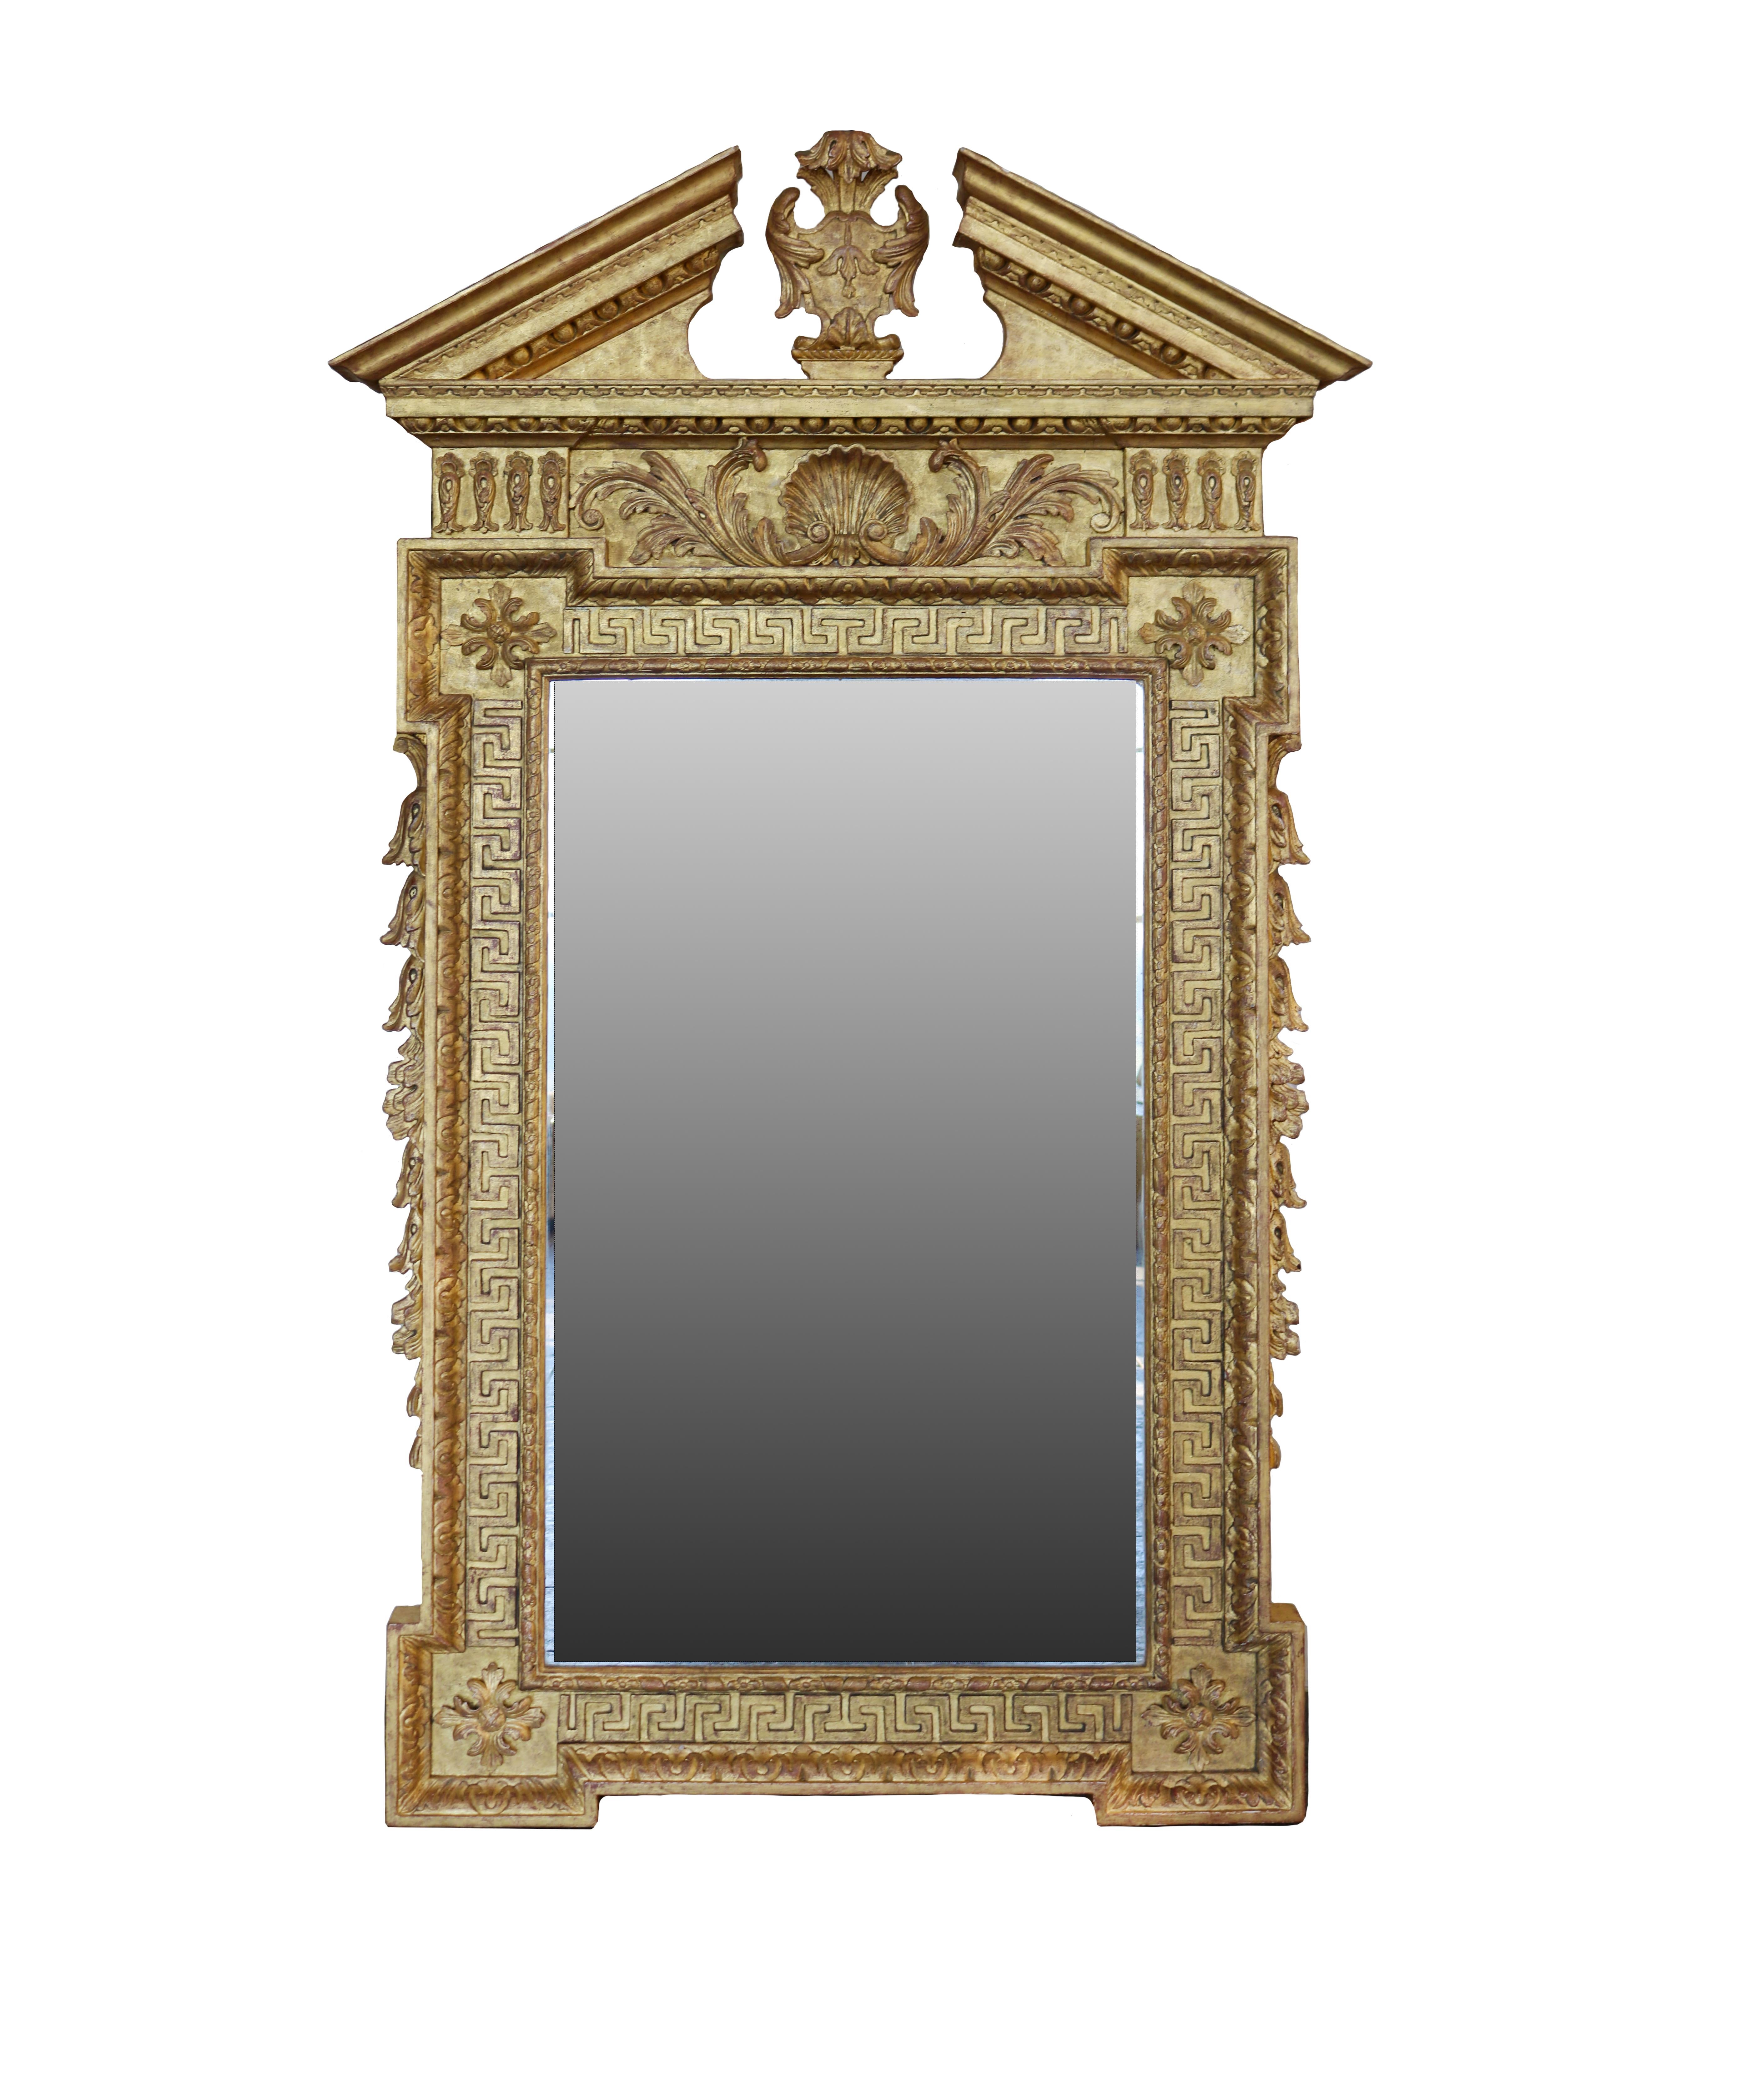 A pair of large wall mirrors after William Kent, in well carved gold leaf frames in a classical antique style with aged distressed plates.